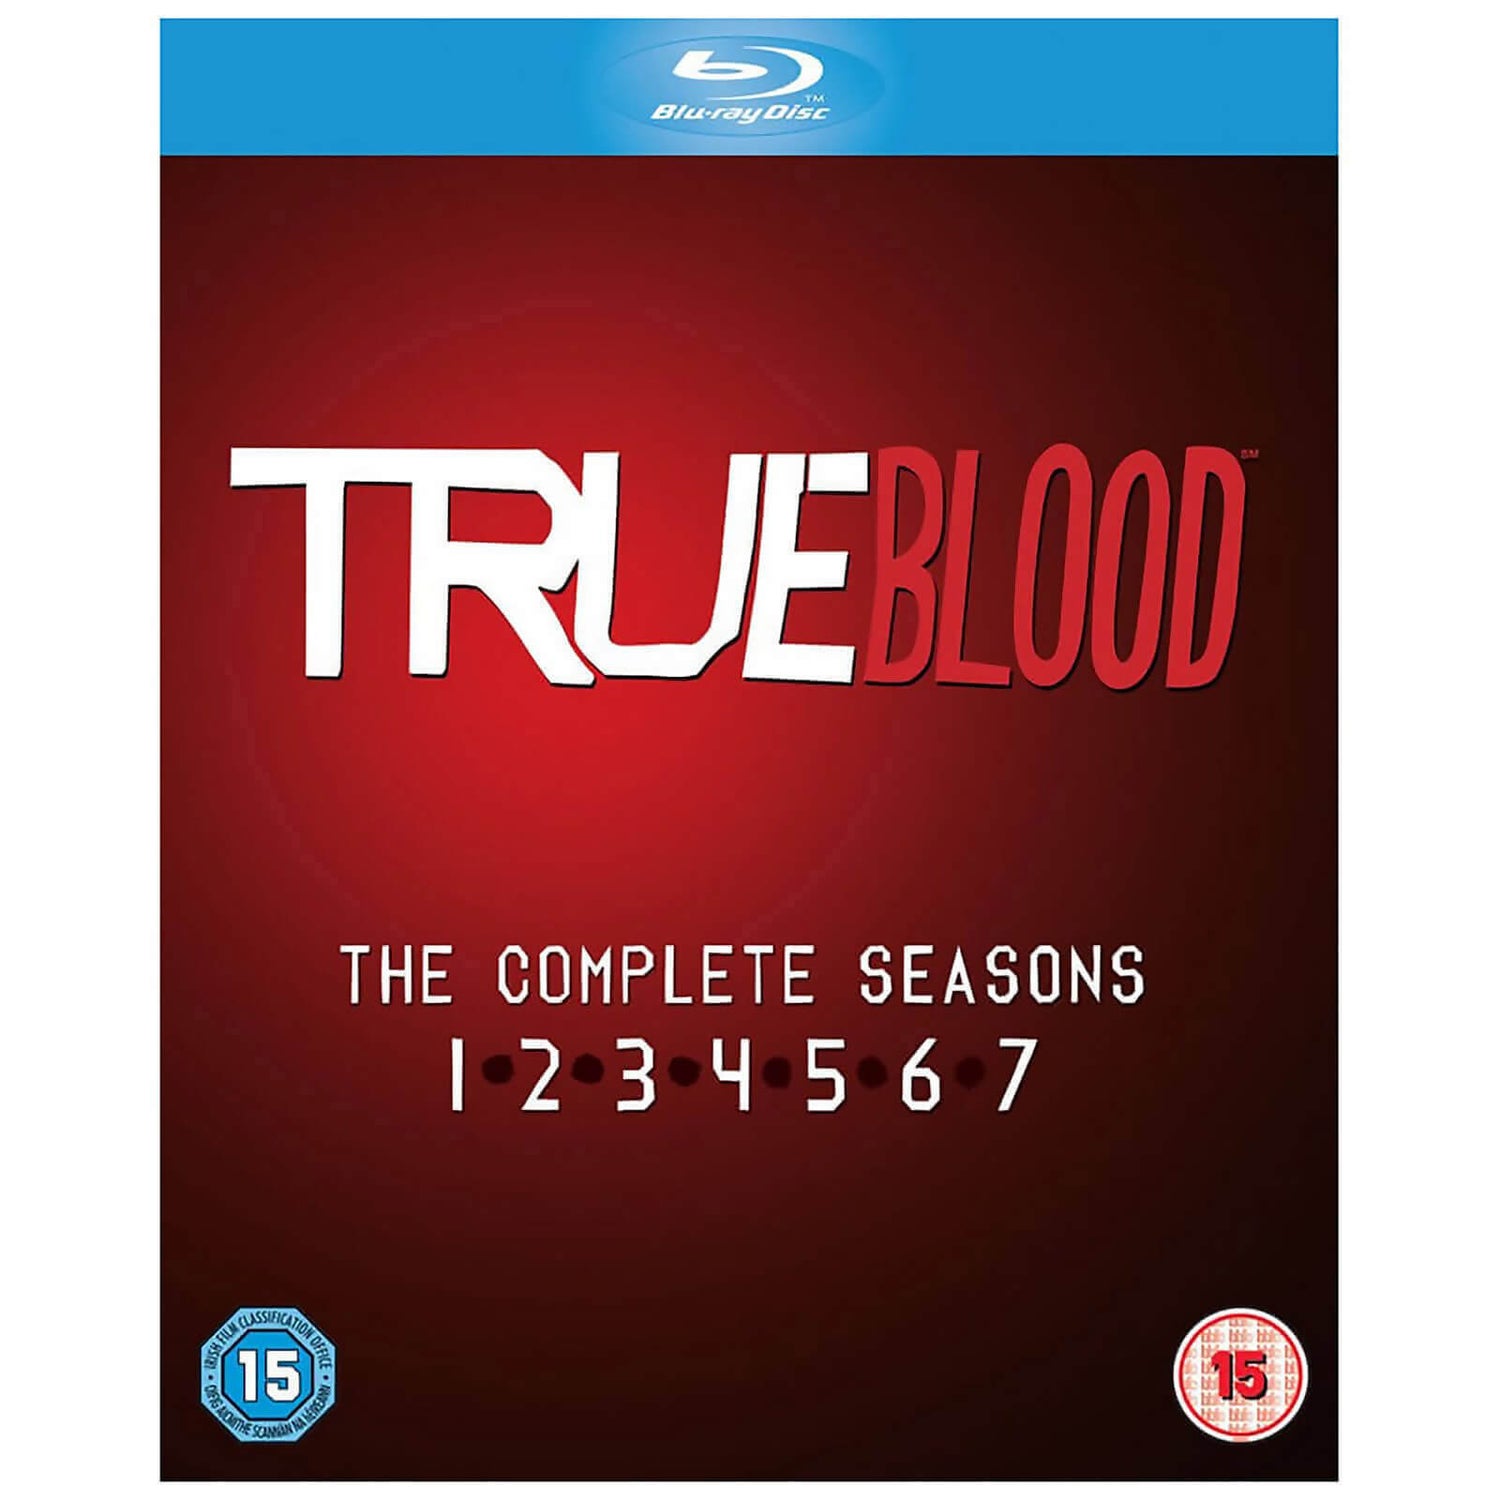 True Blood: The Complete Series [Blu-ray]